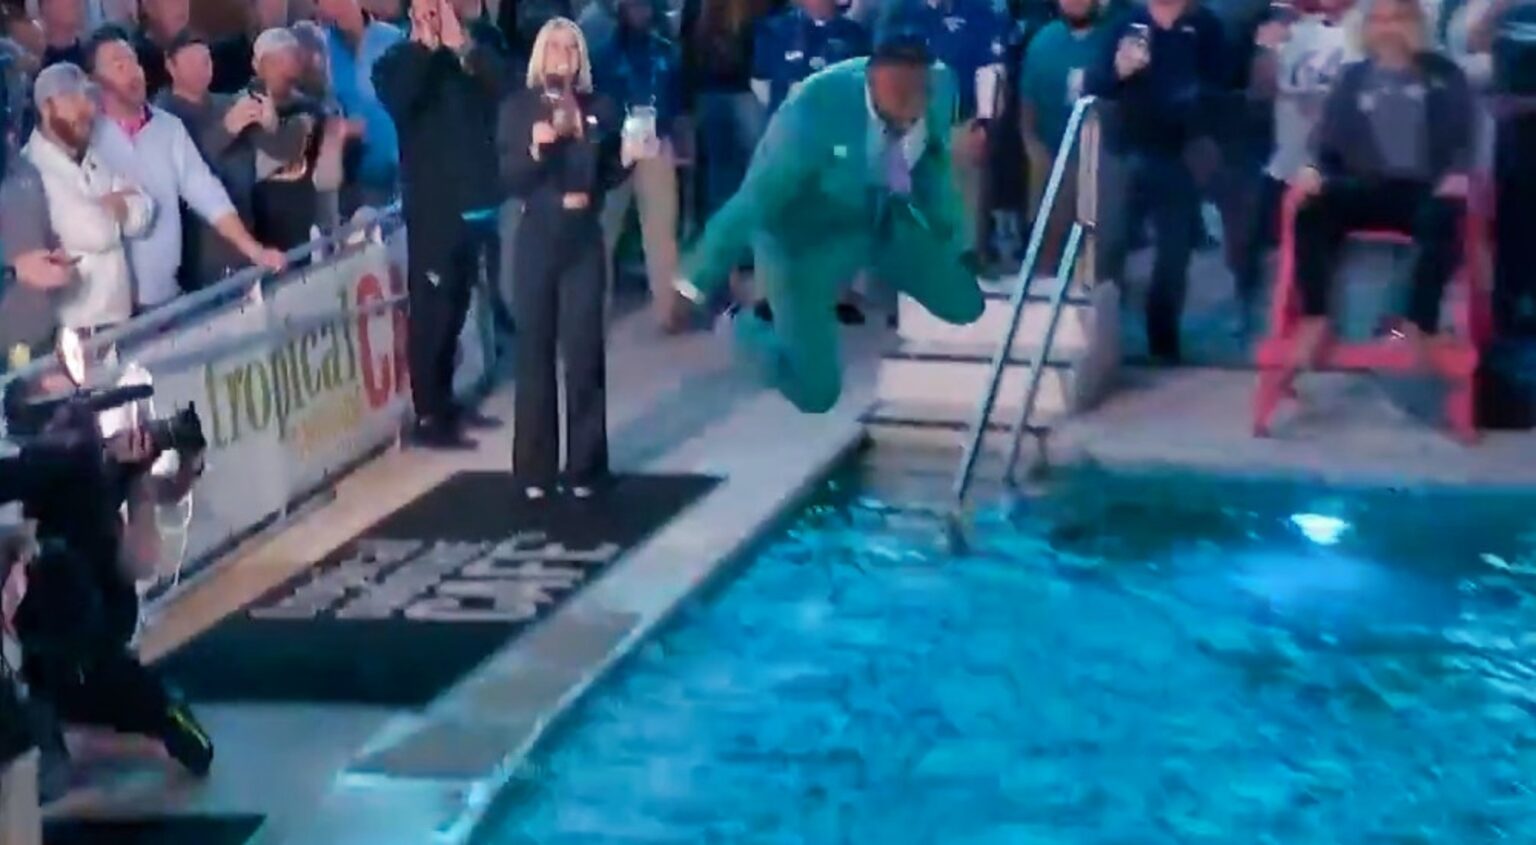 Before Monday Night Football, Robert Griffin III Stunned Everyone by Belly-Flopping Into the Jacksonville Jaguars Pool While Wearing His Suit (VIDEO)